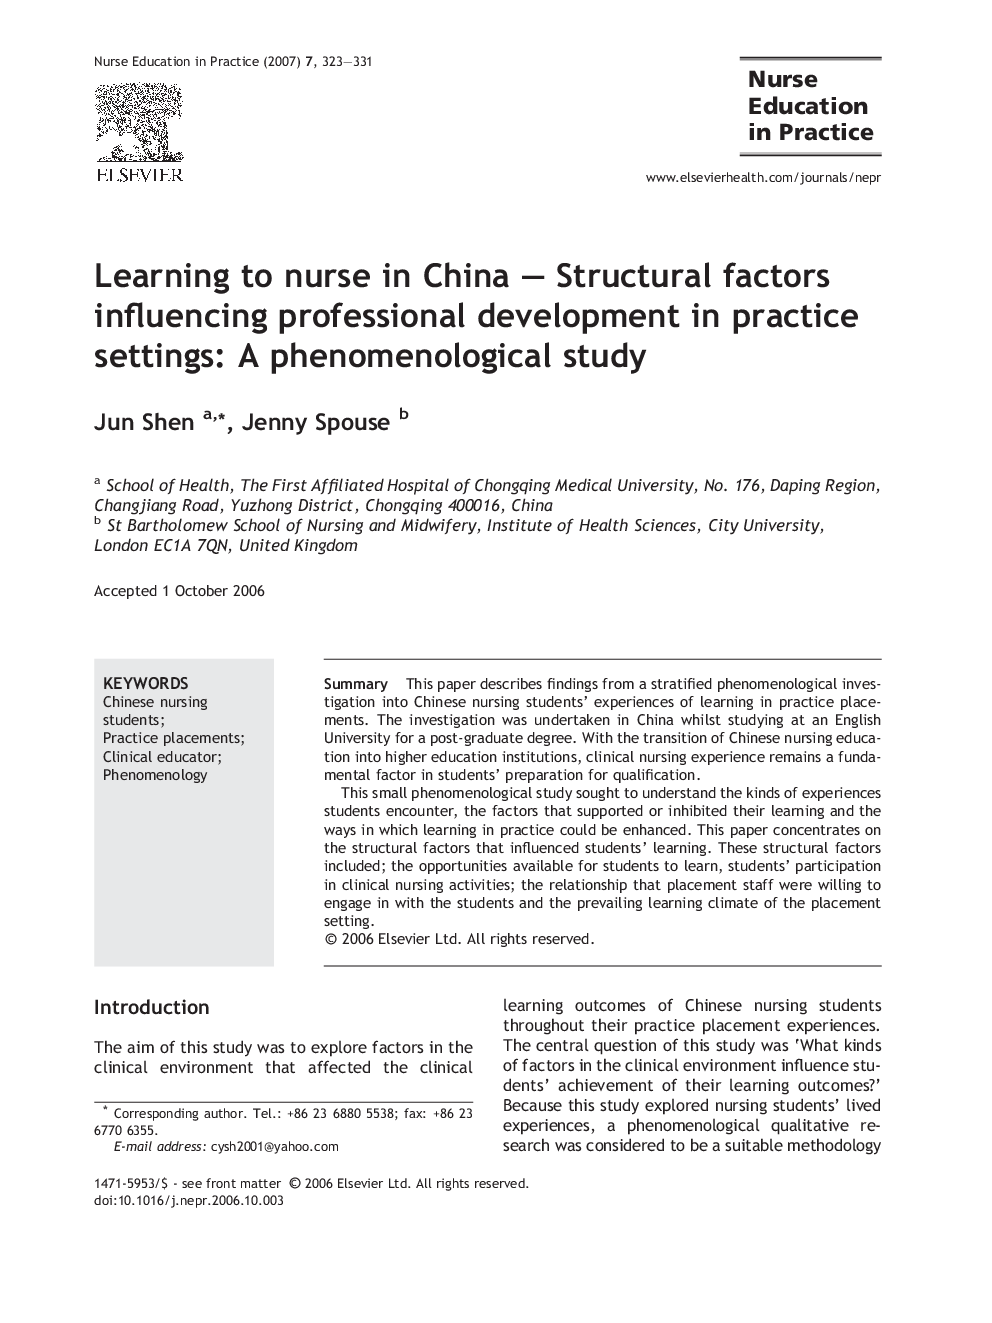 Learning to nurse in China – Structural factors influencing professional development in practice settings: A phenomenological study